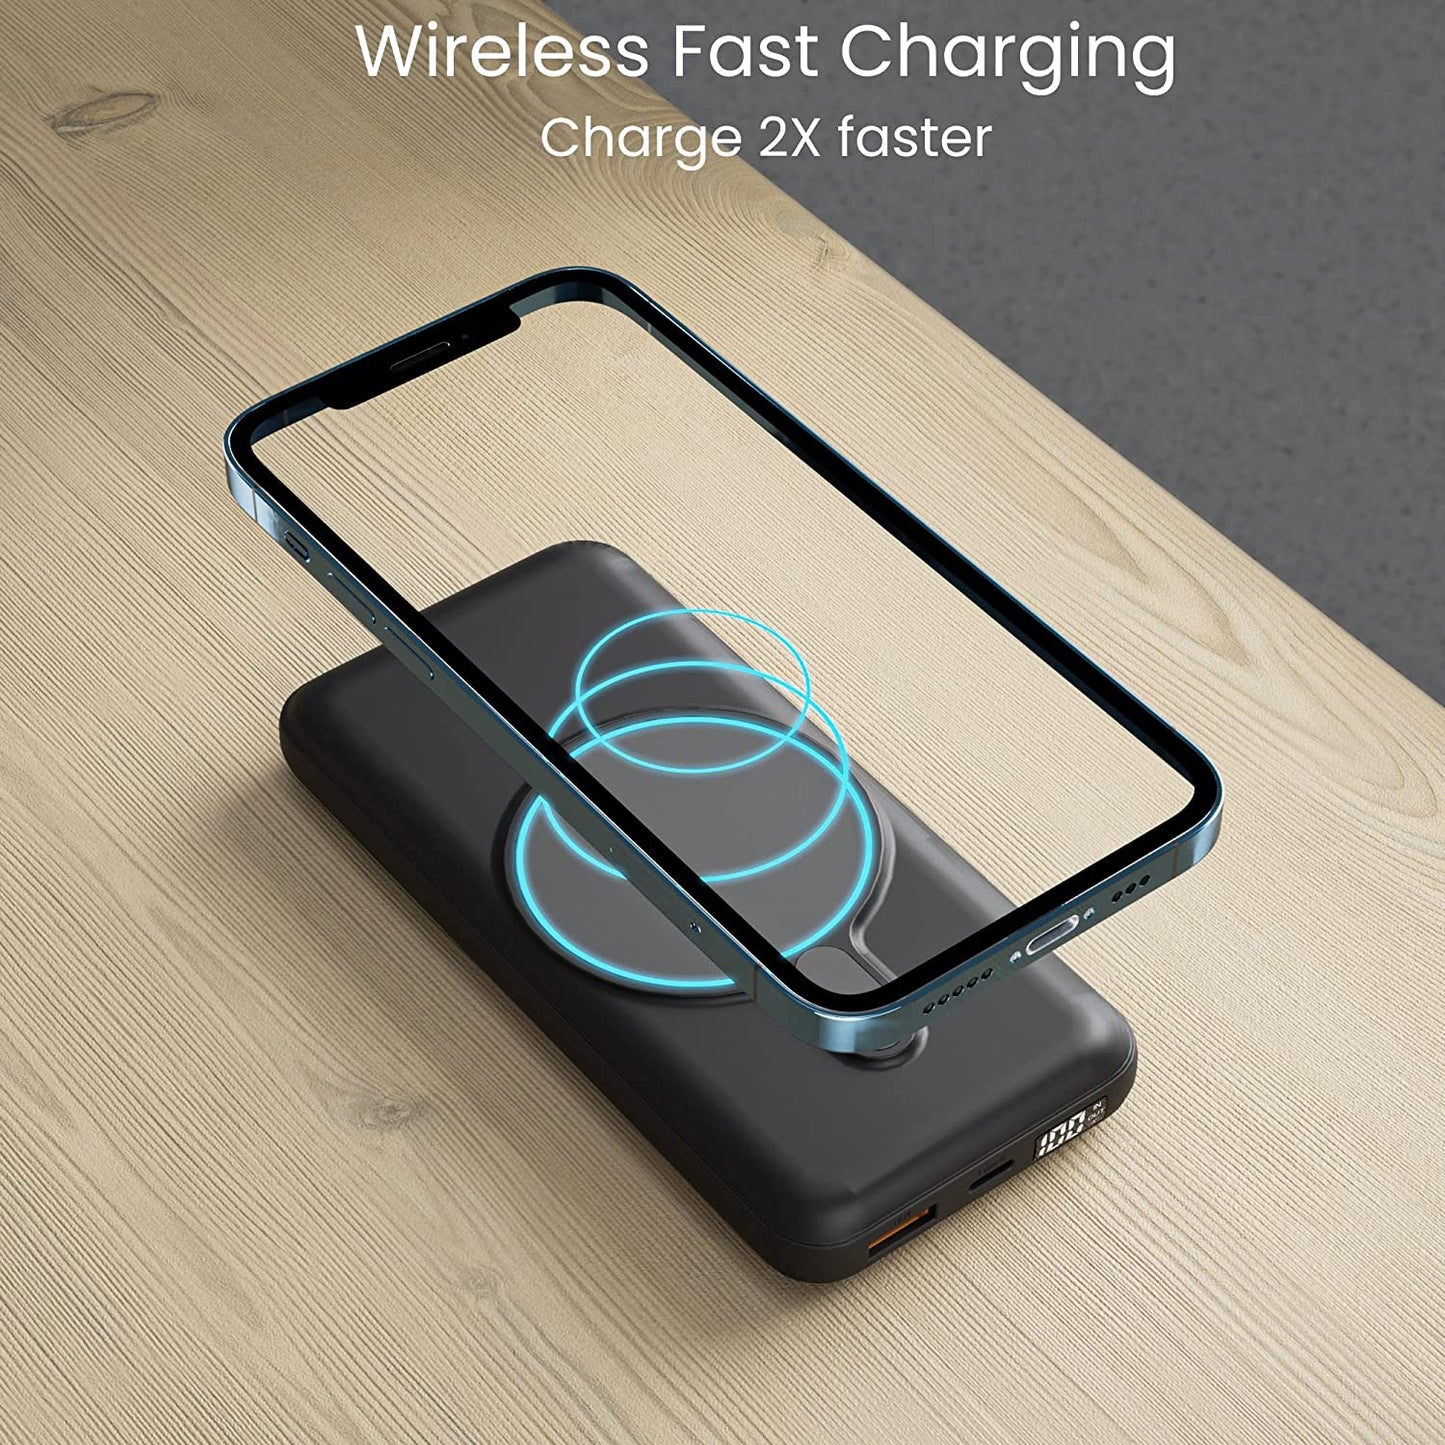 MagBoost 20000mAh Magnetic Wireless Portable Charger - TechsmarterTechsmarter